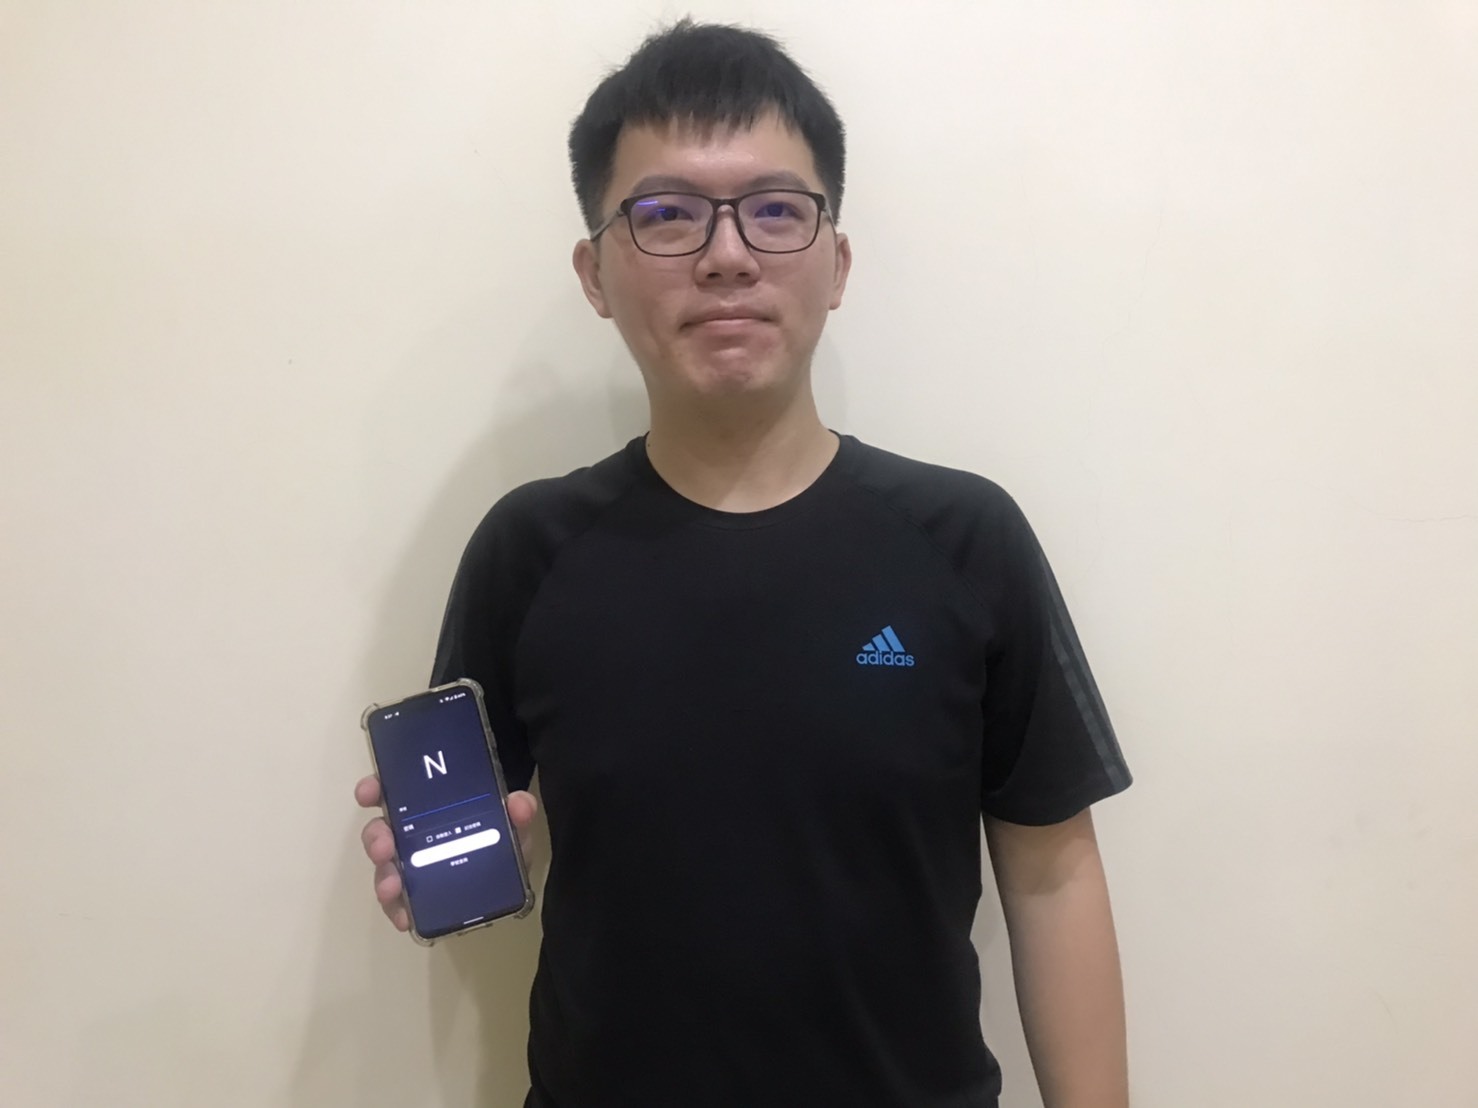 Third-year student of the Department of Computer Science and Engineering Chih-Kang Fang developed an all-in-one application for students.